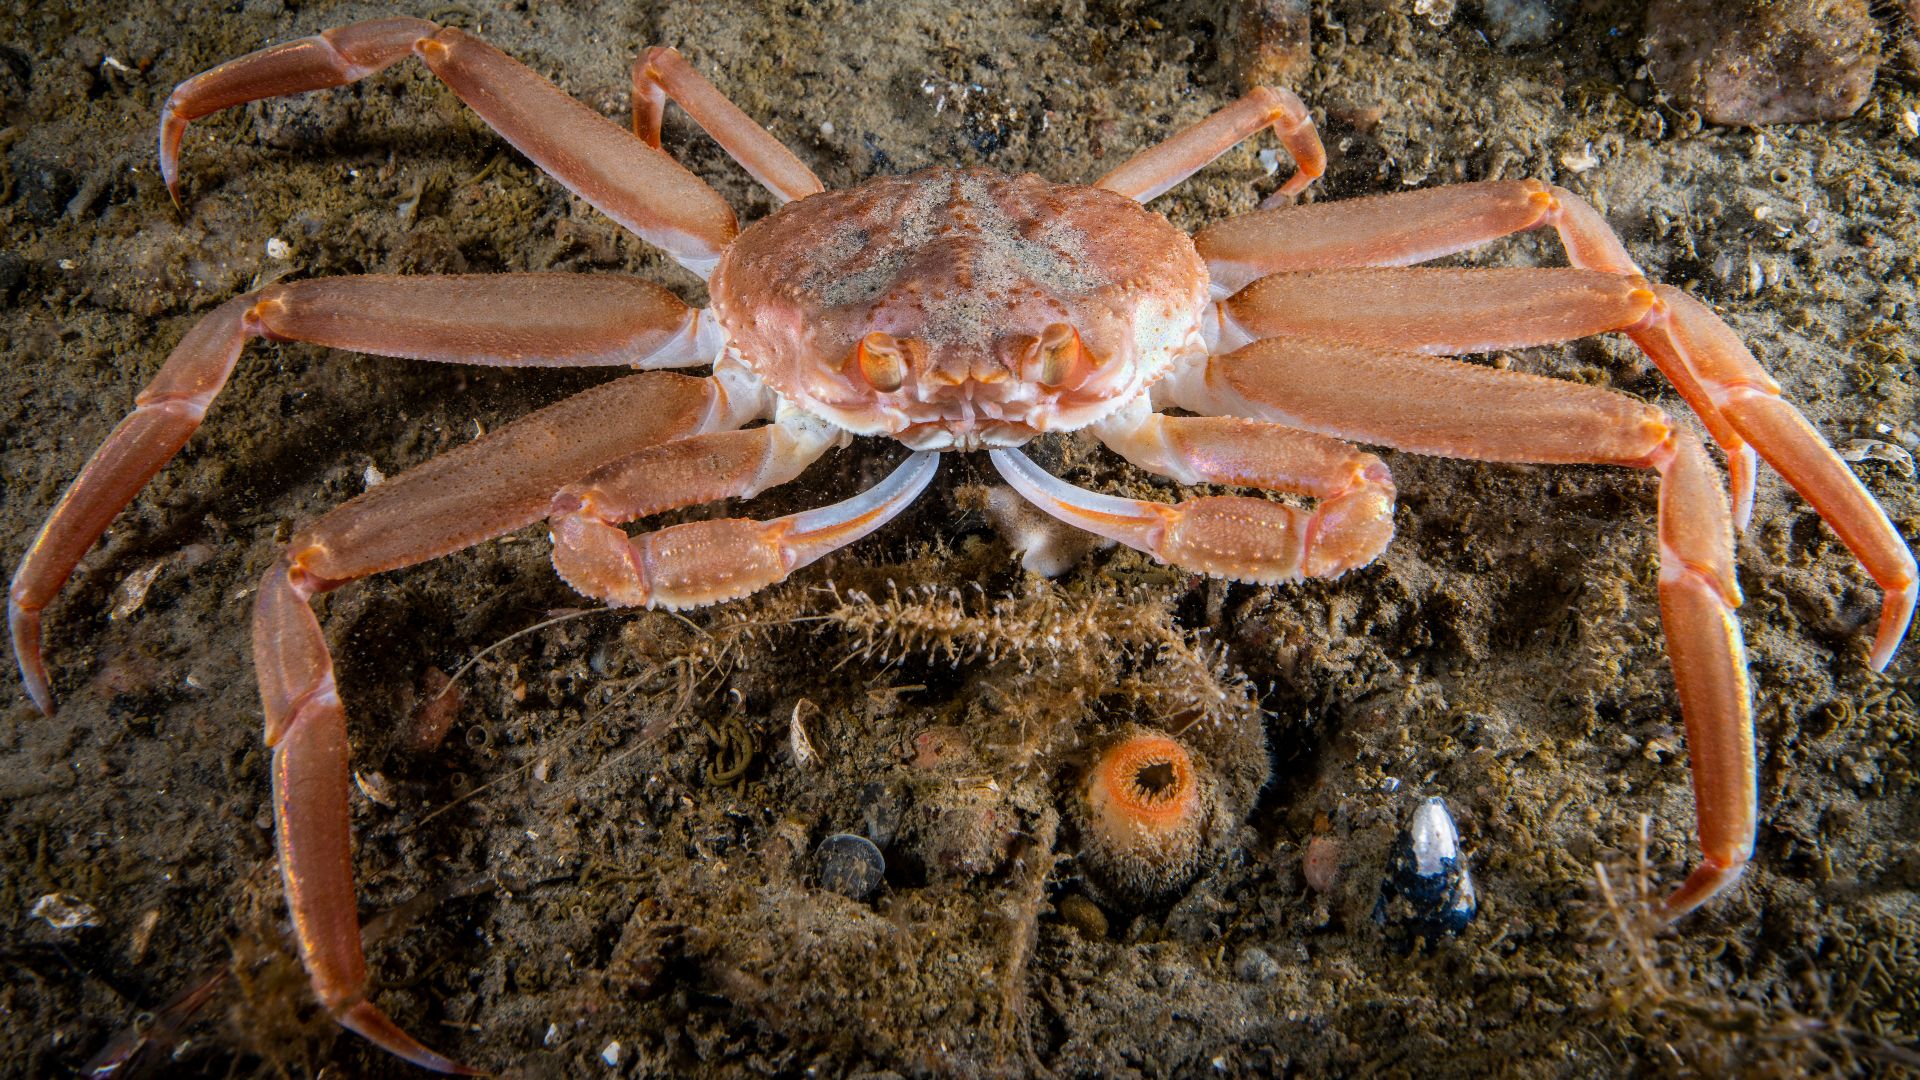 What made billions of snow crabs disappear from the Bering Sea? Live